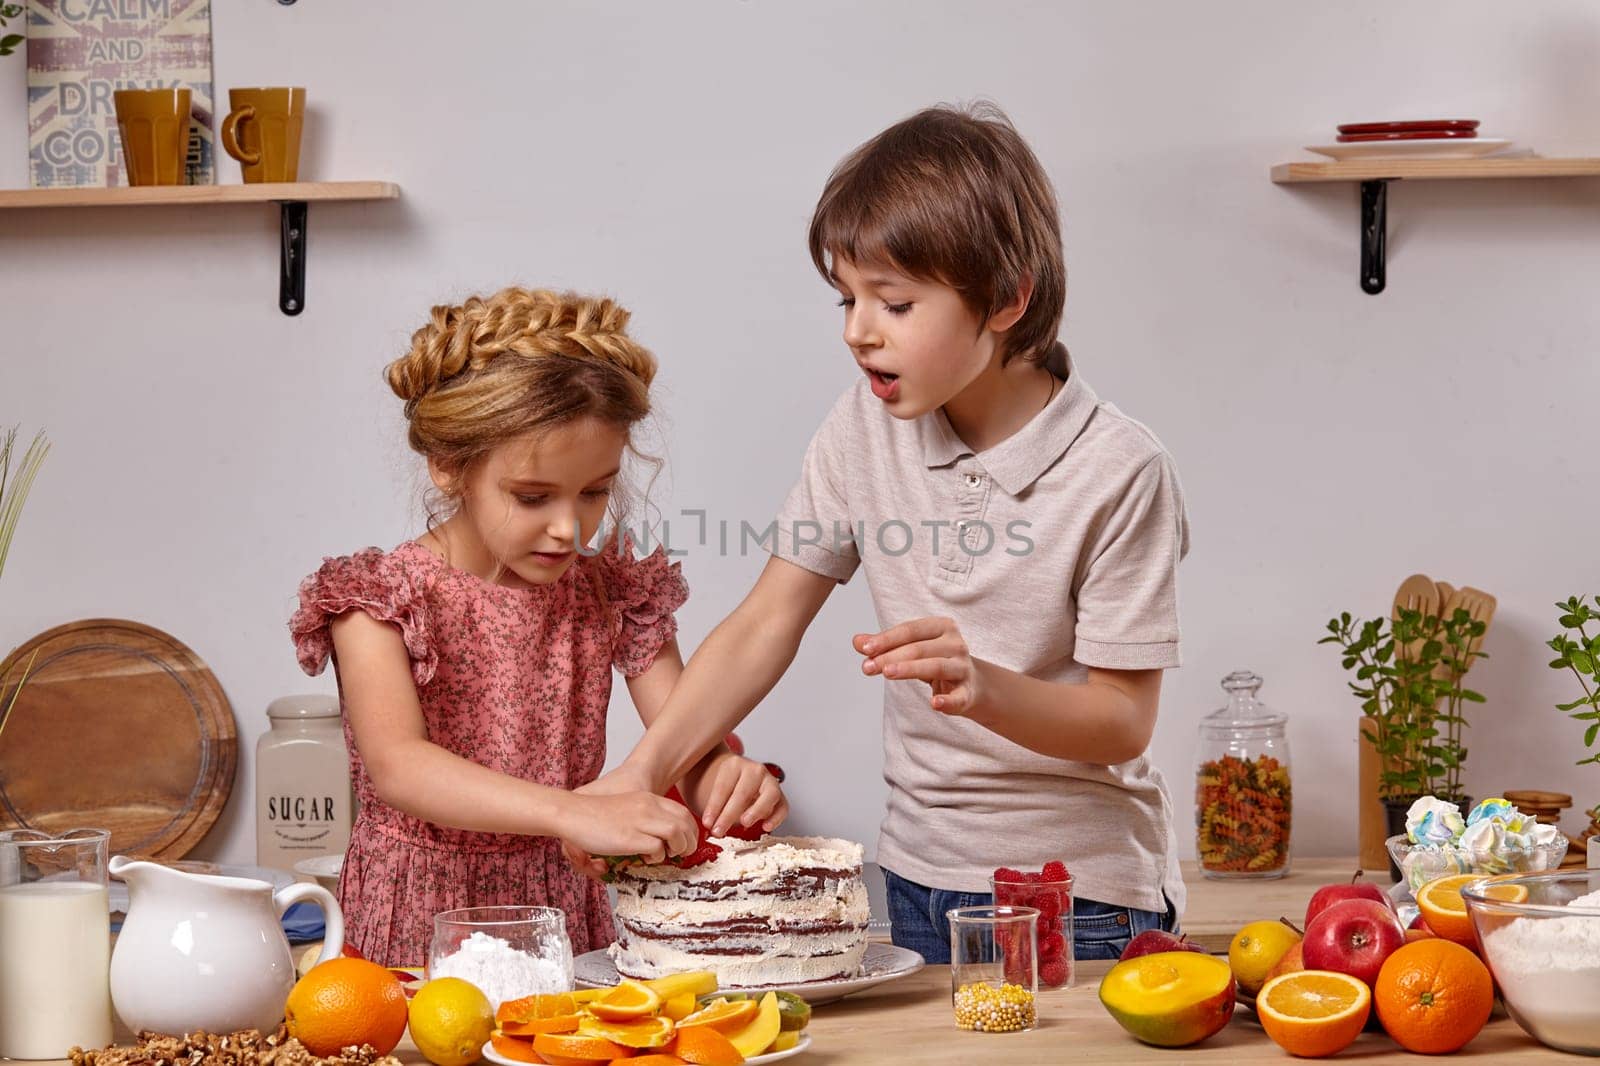 Little brunette kid dressed in a light t-shirt and jeans and a beautiful girl with a braid in her hair, wearing in a pink dress are making a cake at a kitchen, against a white wall with shelves on it. They are decorating a cake with some strawberries.